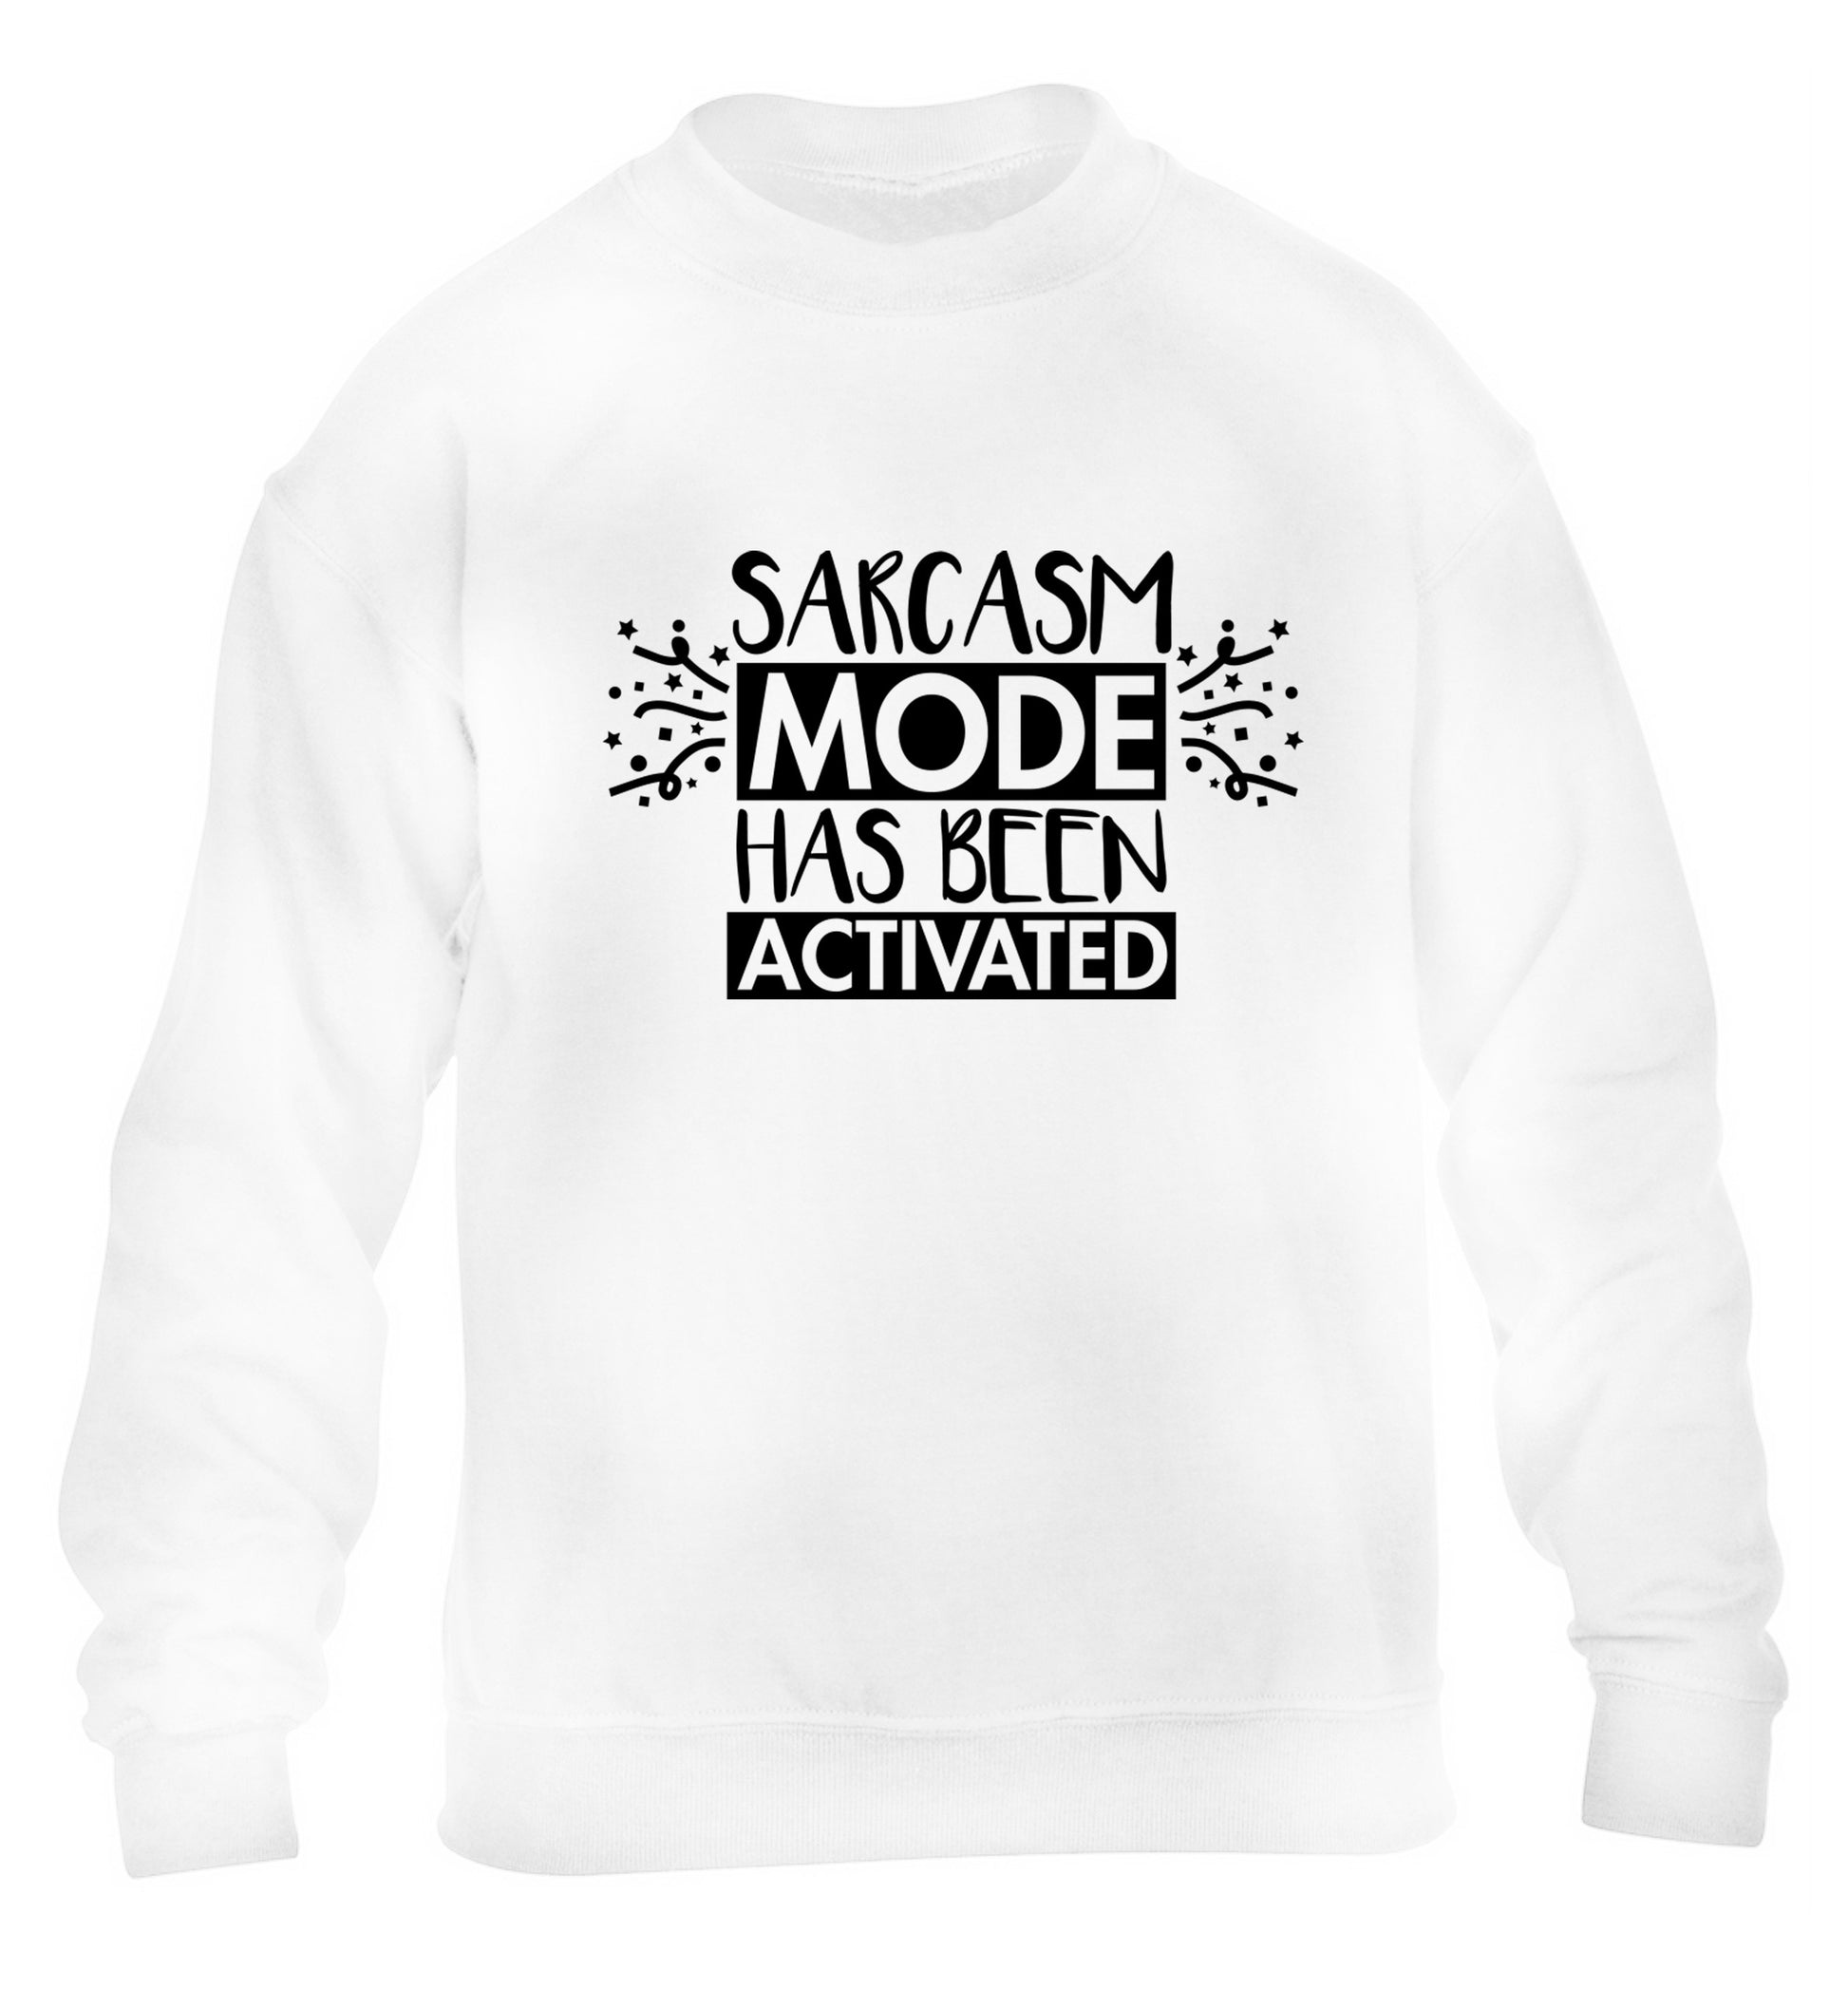 Sarcarsm mode has been activated children's white sweater 12-14 Years